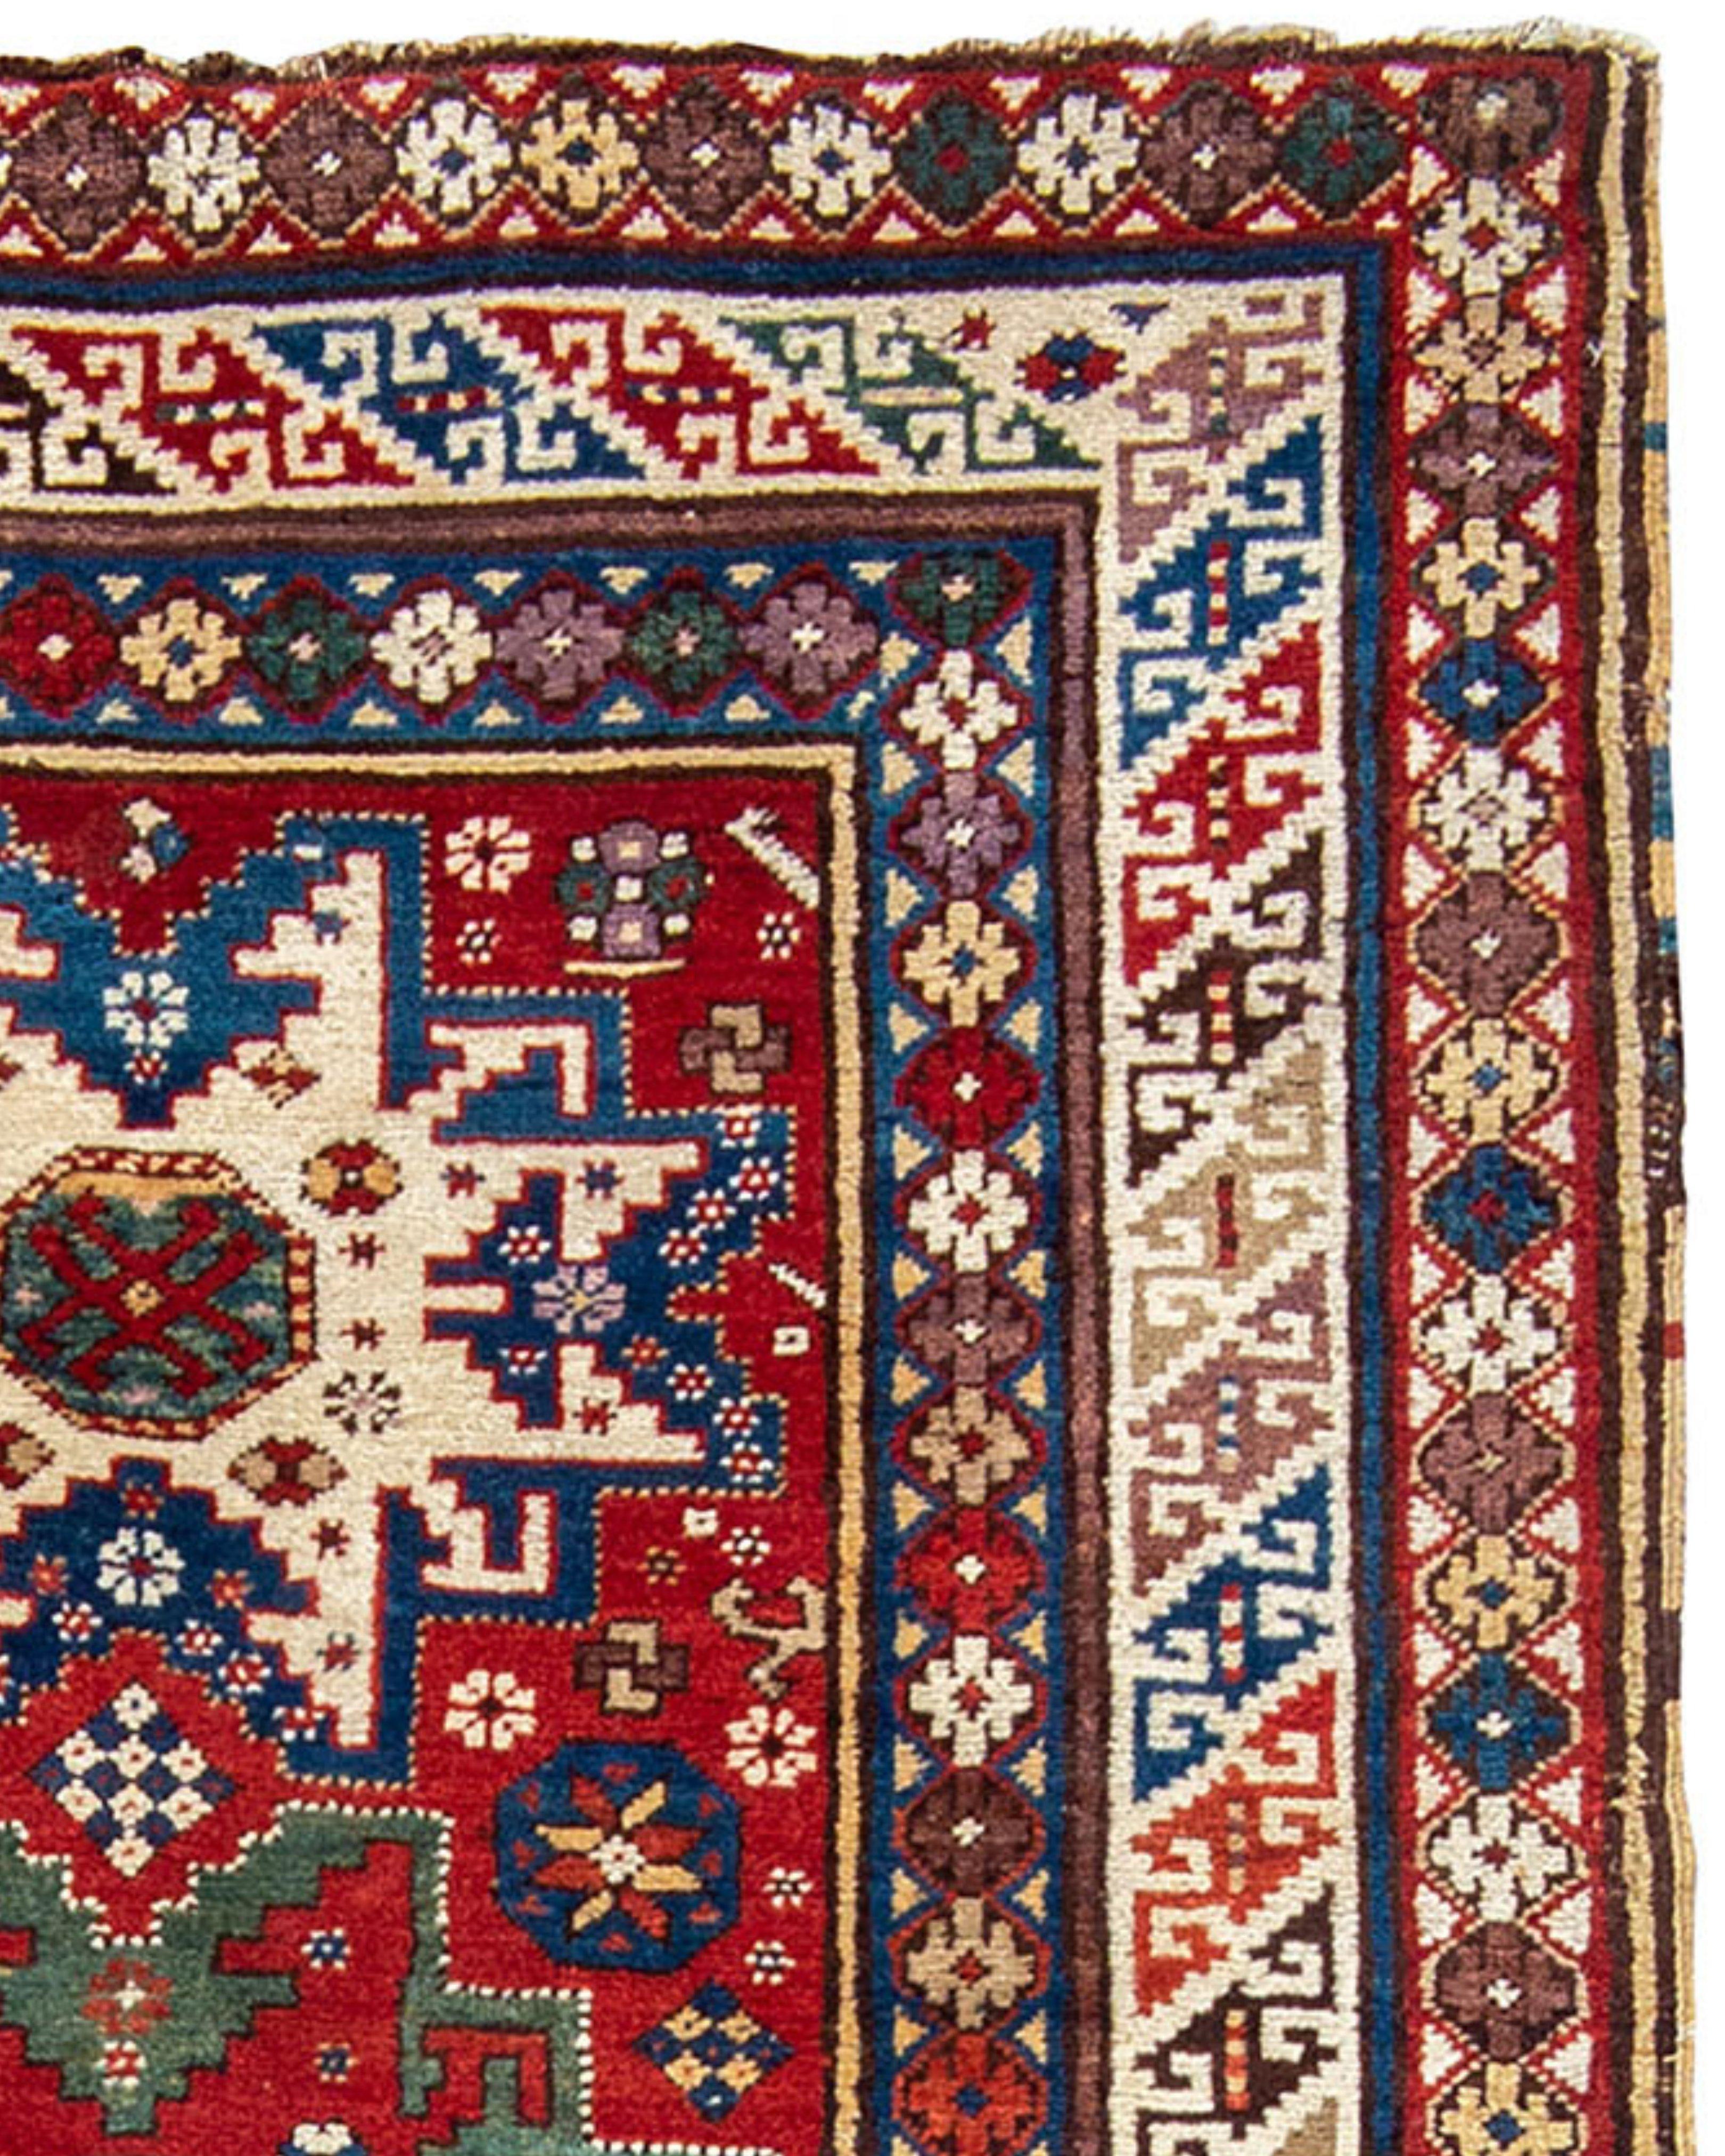 Antique Caucasian Derbend Long Rug, Late 19th Century

This stunning Derbend from the Caucasus features

Additional Information:
Dimensions: 5'0